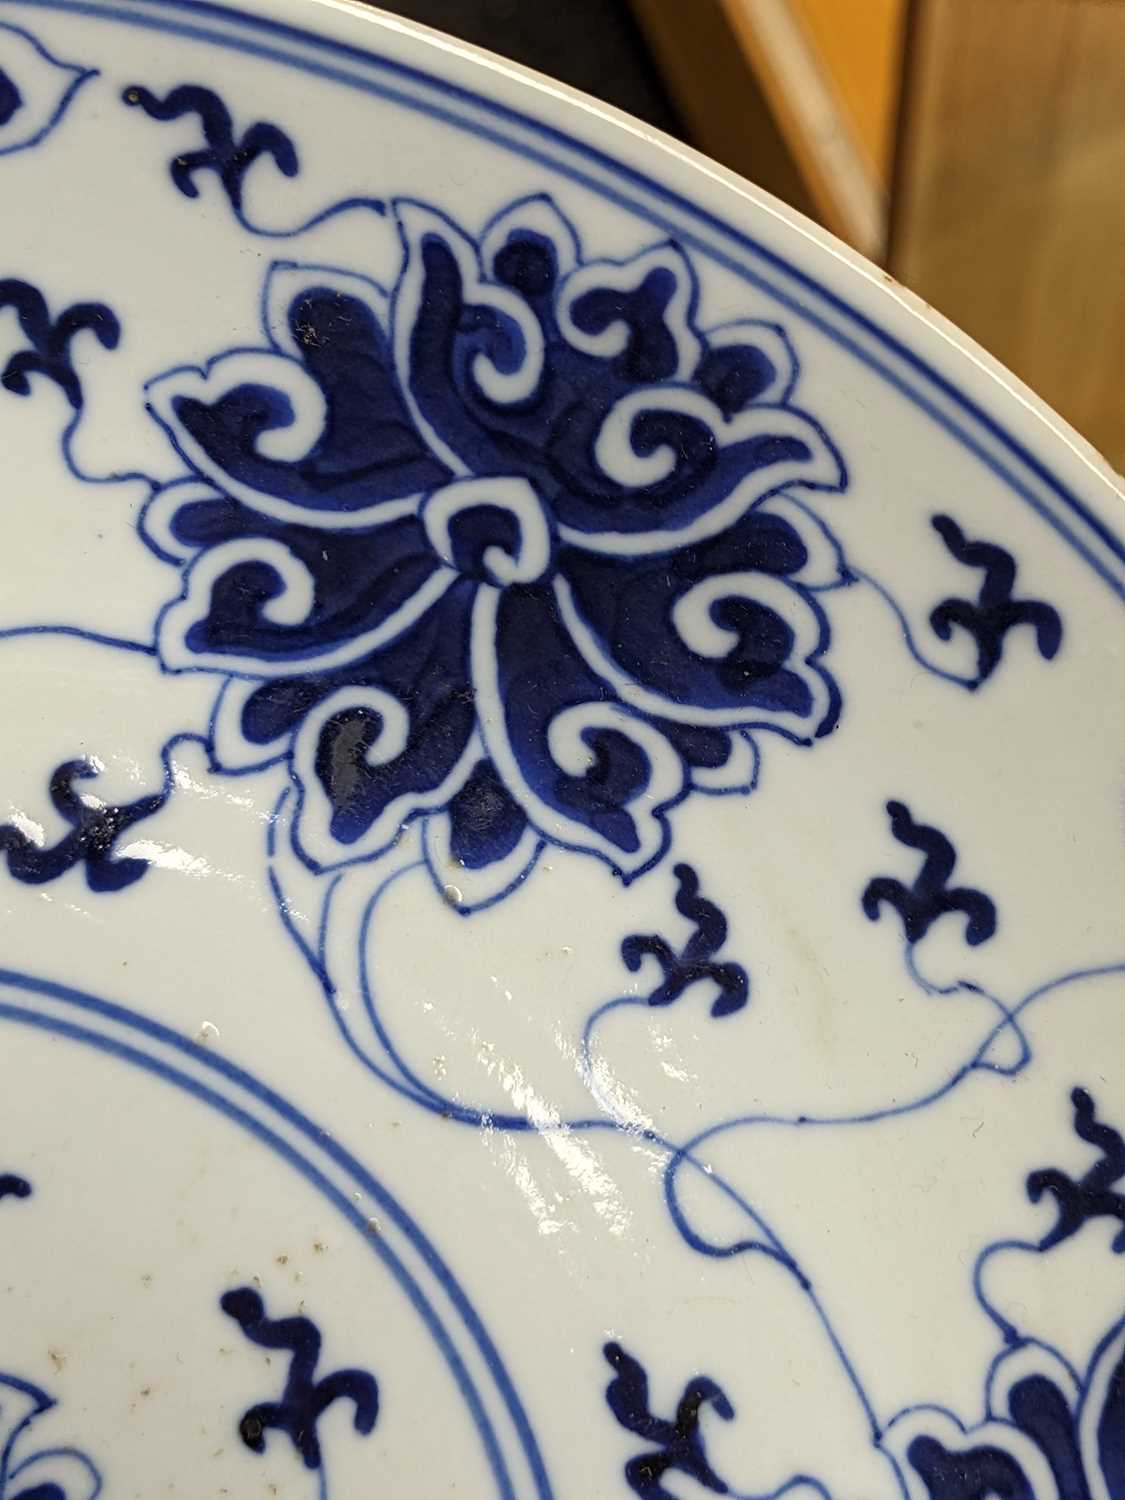 TWO SIMILAR CHINESE BLUE & WHITE 'LOTUS' SAUCER DISHES, painted in the Ming-style, one painted - Image 3 of 7